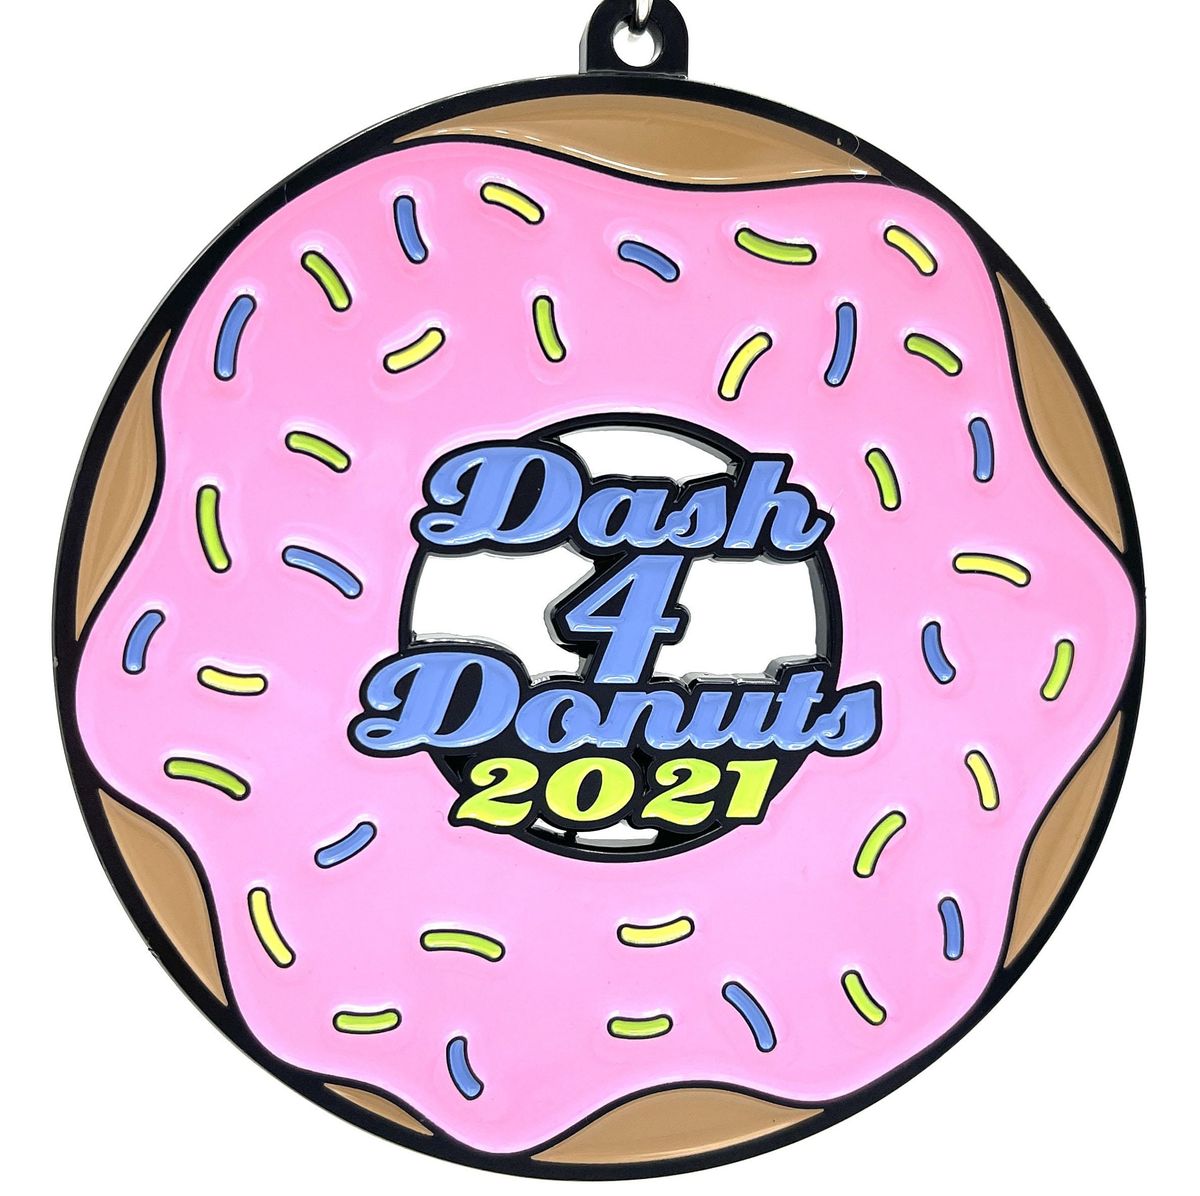 Dash 4 Donuts 1M 5K 10K 13.1 26.2-Participate from Home. Save $10!